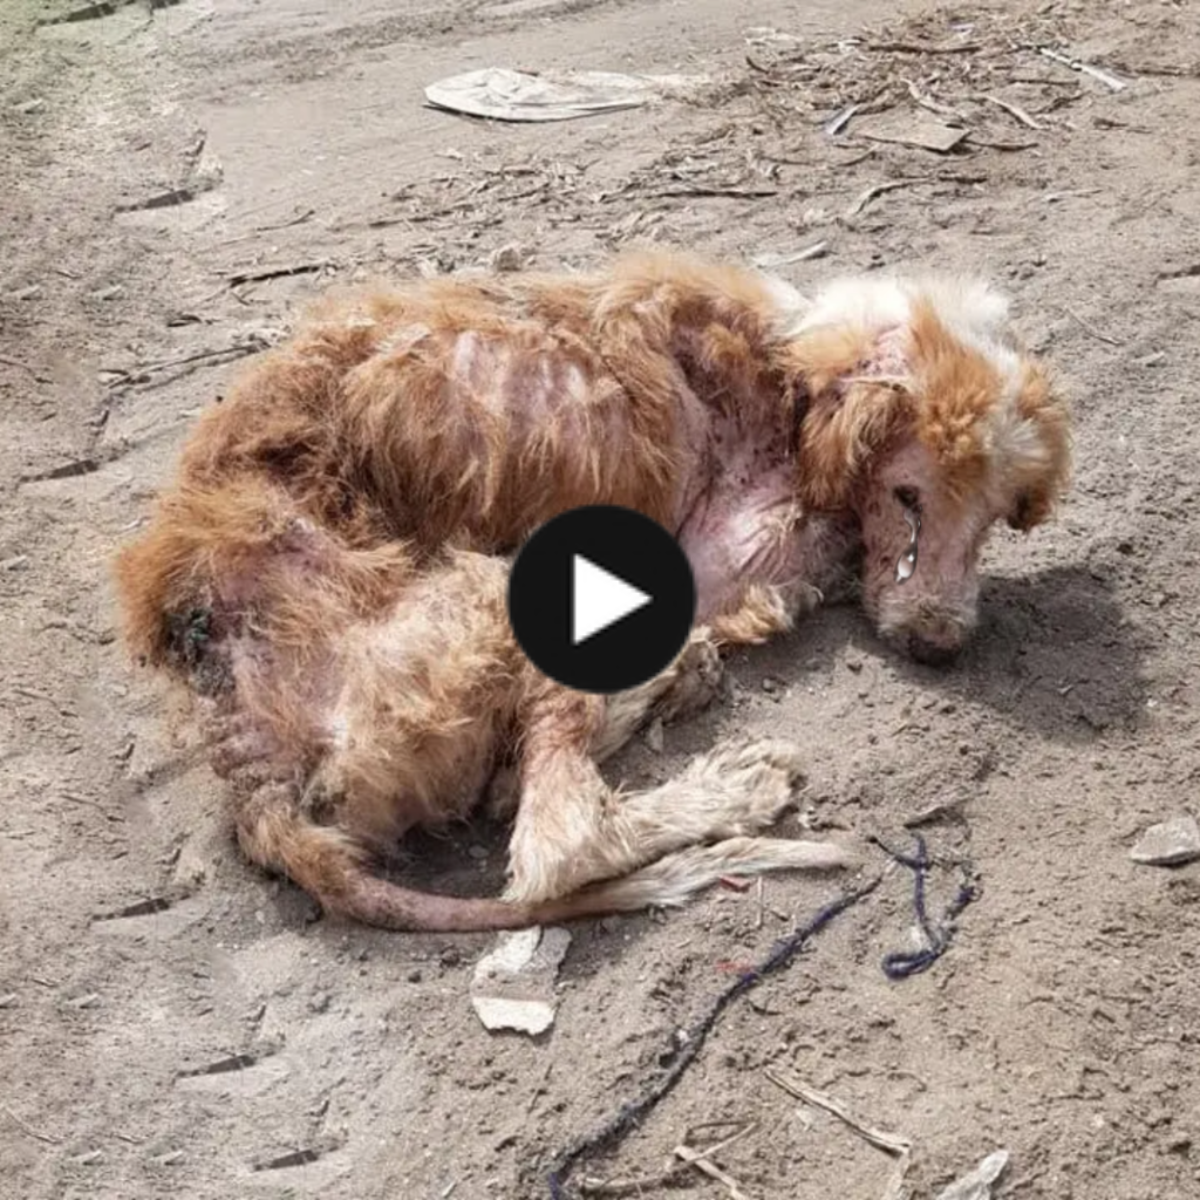 Rising from Destruction: The Amazing Recovery of a Dog That Looked Like a Walking Skeleton After Starvation and Cruelty